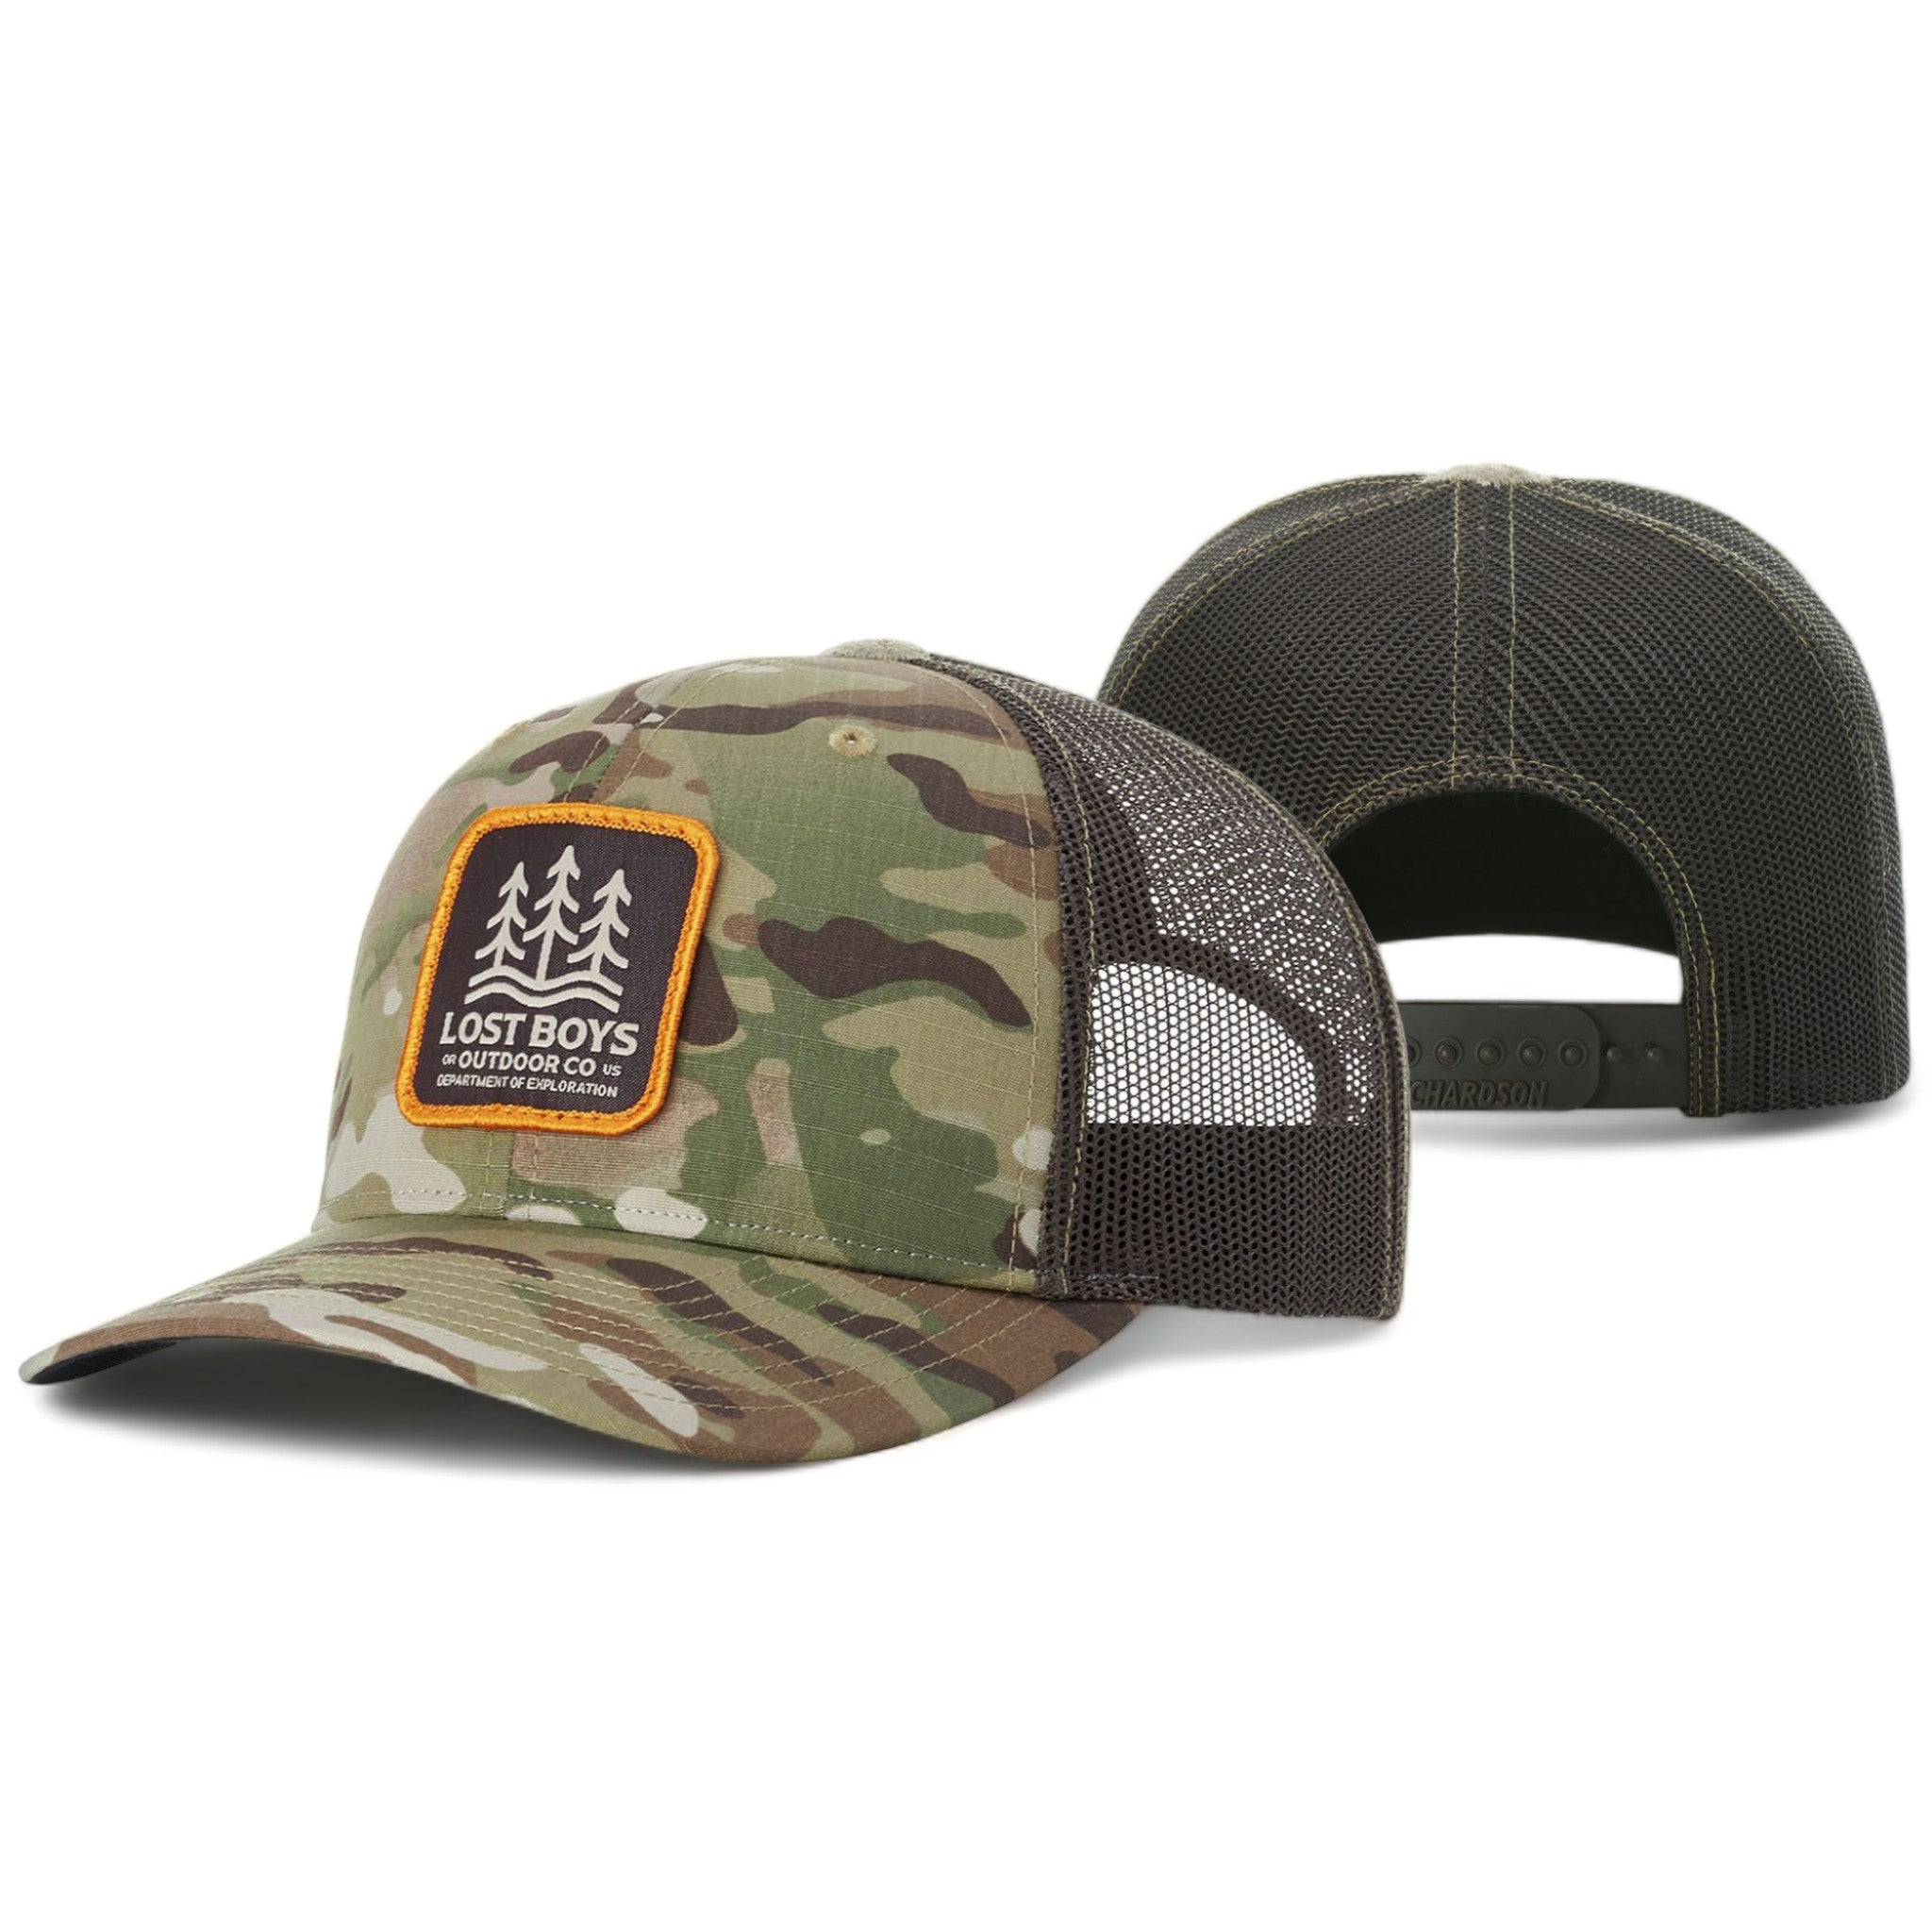 Custom camo hat with patch